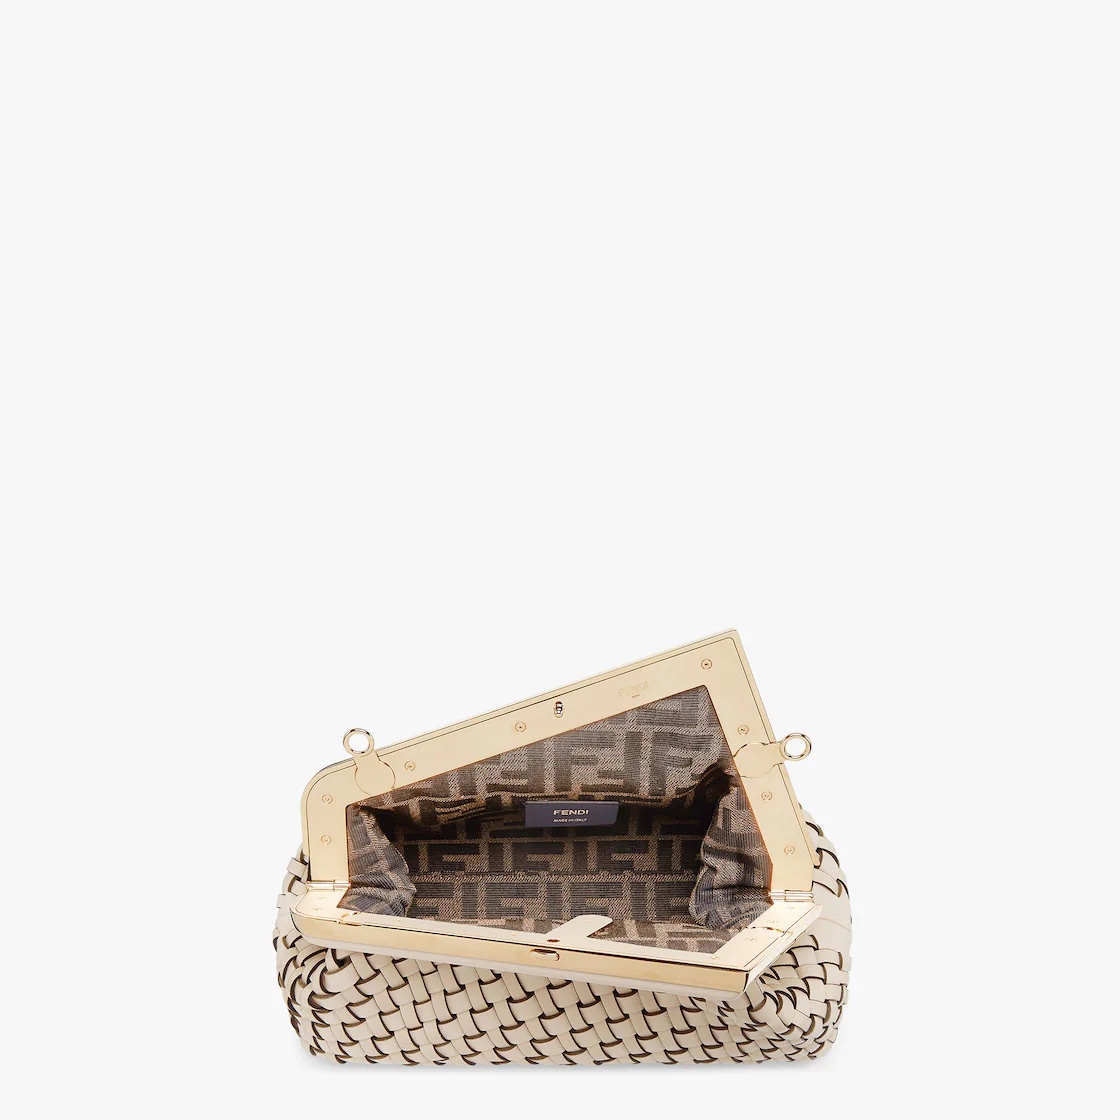 Small Fendi First bag made of finely braided beige leather, with oversized metal F clasp bound in to - 4